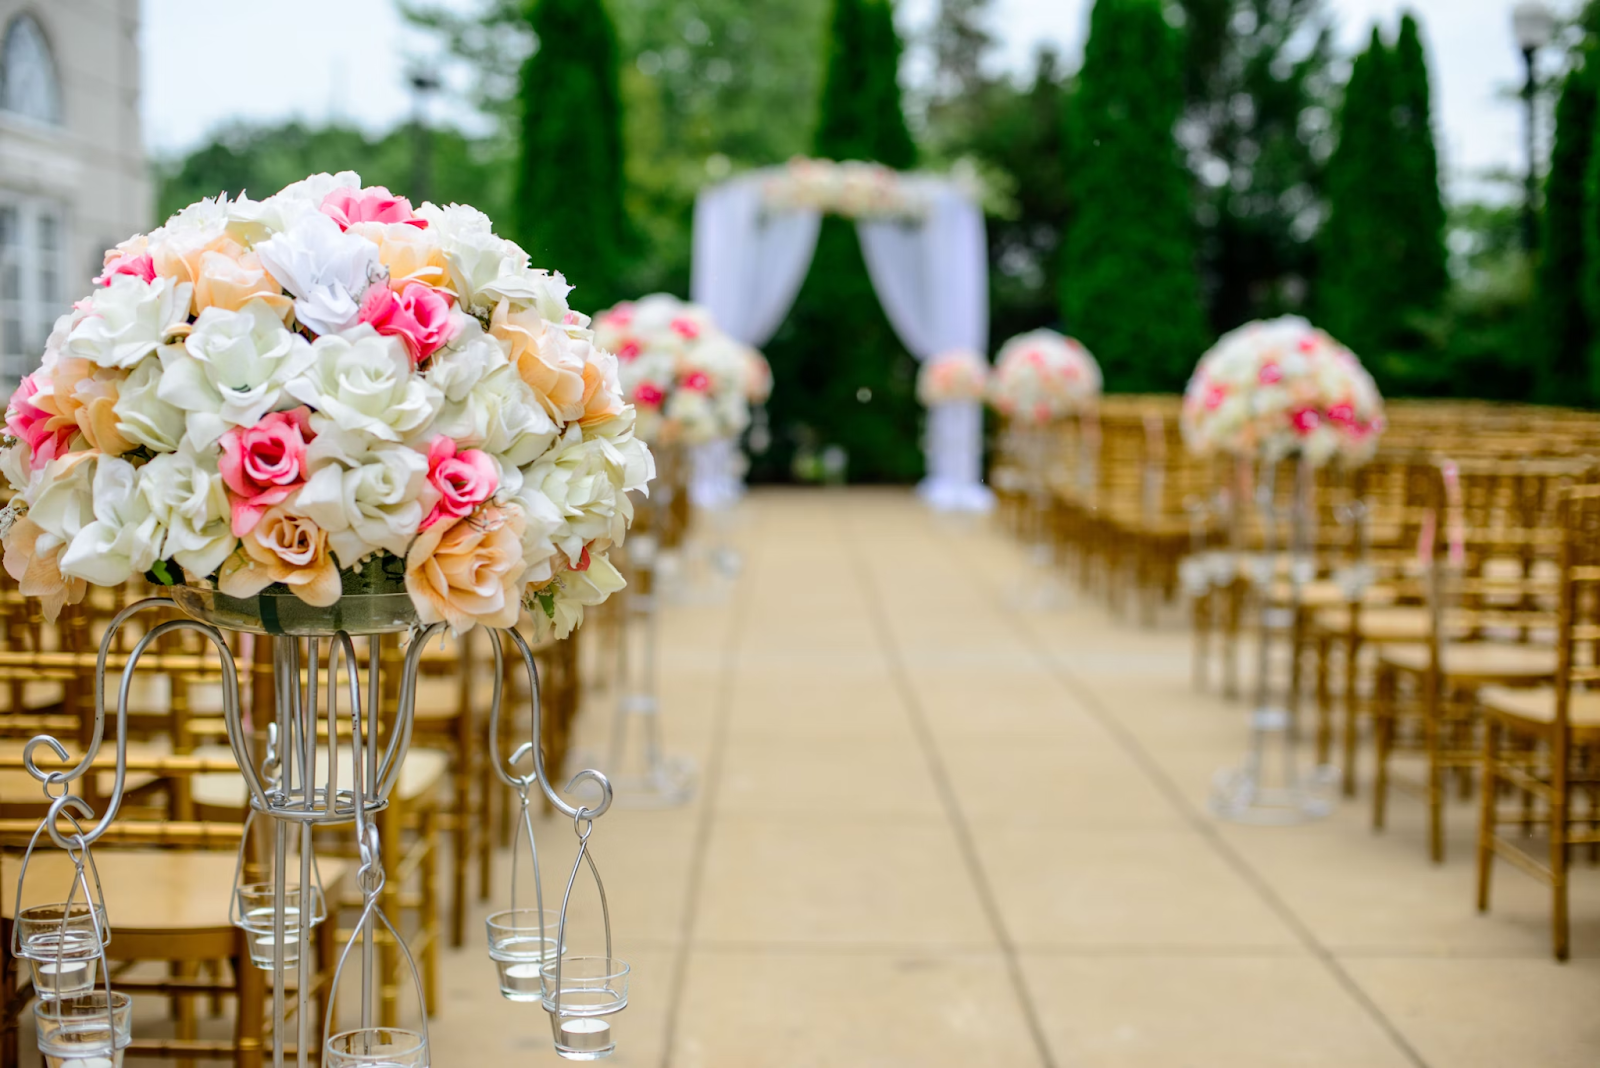 picture of an outdoor wedding venue lined with wooden chairs, with a colorful bouquet of white, pink, and peach roses in the foreground